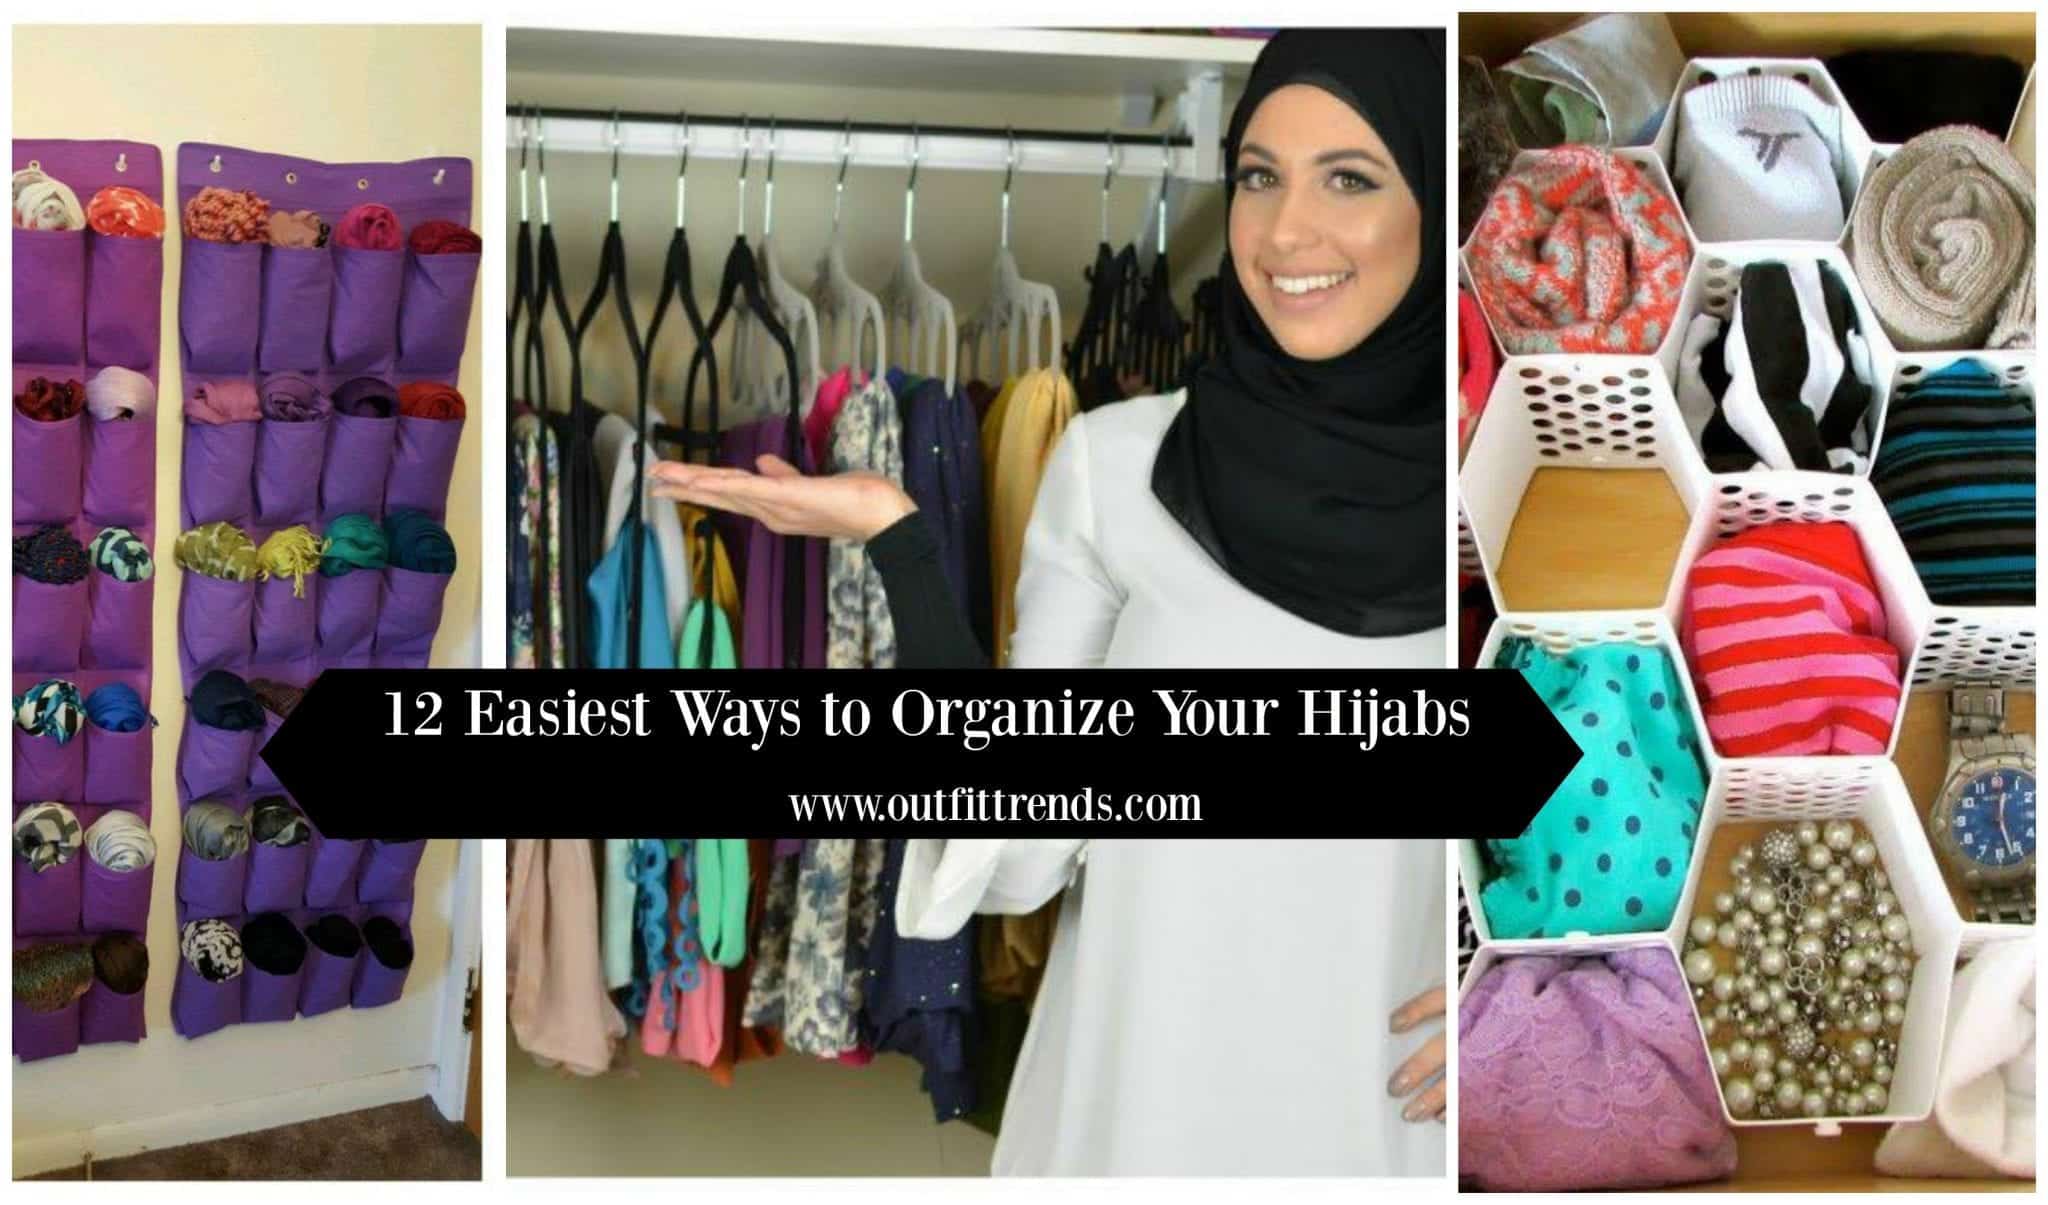 20 Great Ideas for Organizing Hijab for Every Day Routines